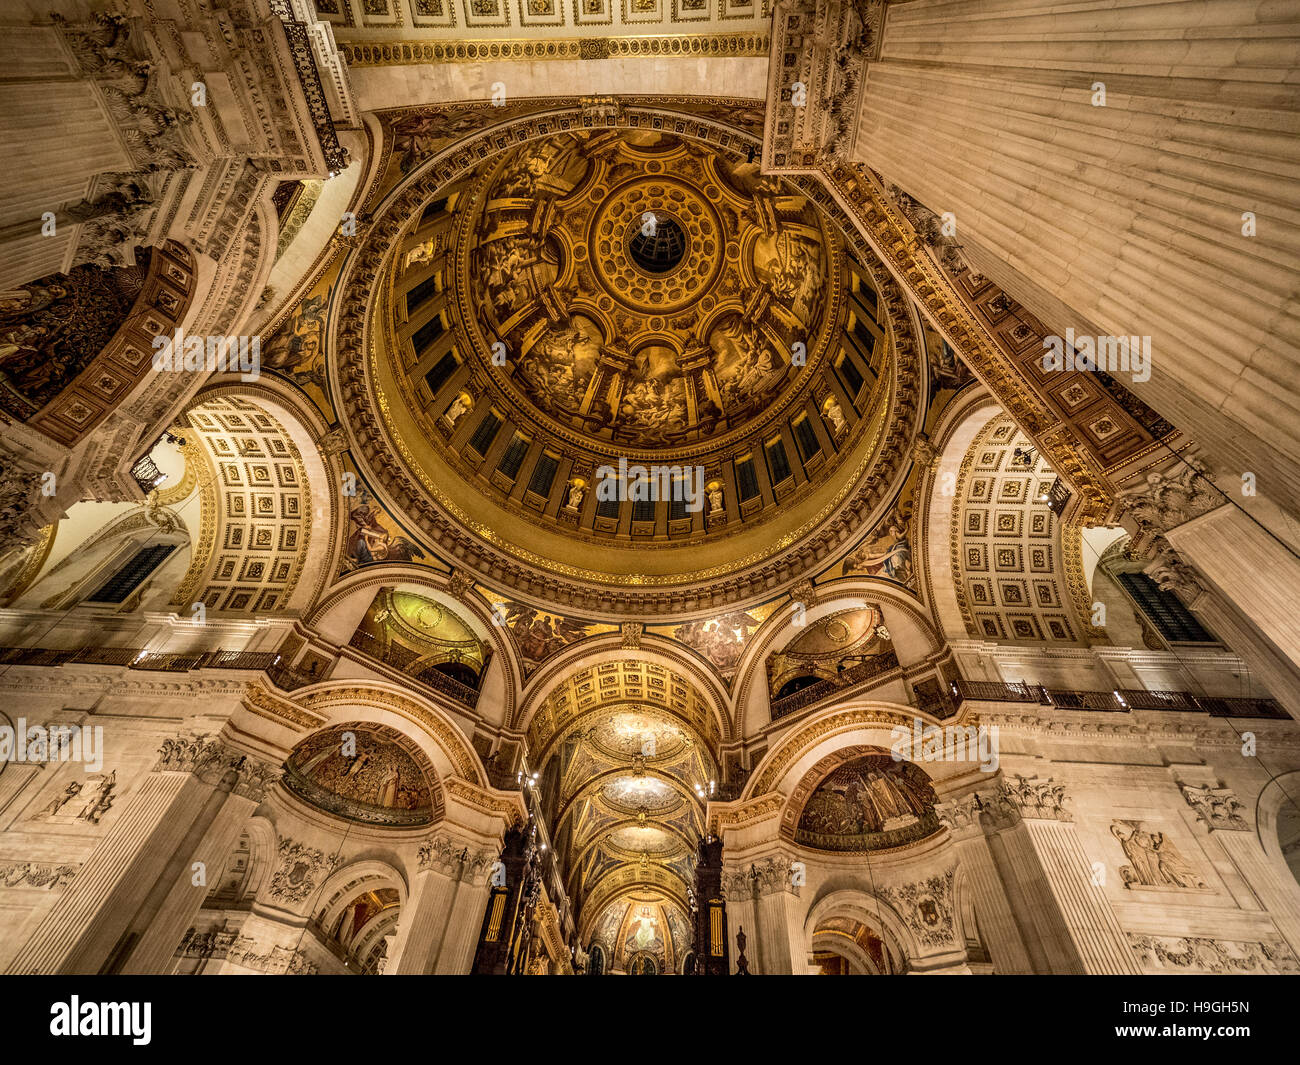 Interior of St Paul's Cathedral, London, UK. Stock Photo